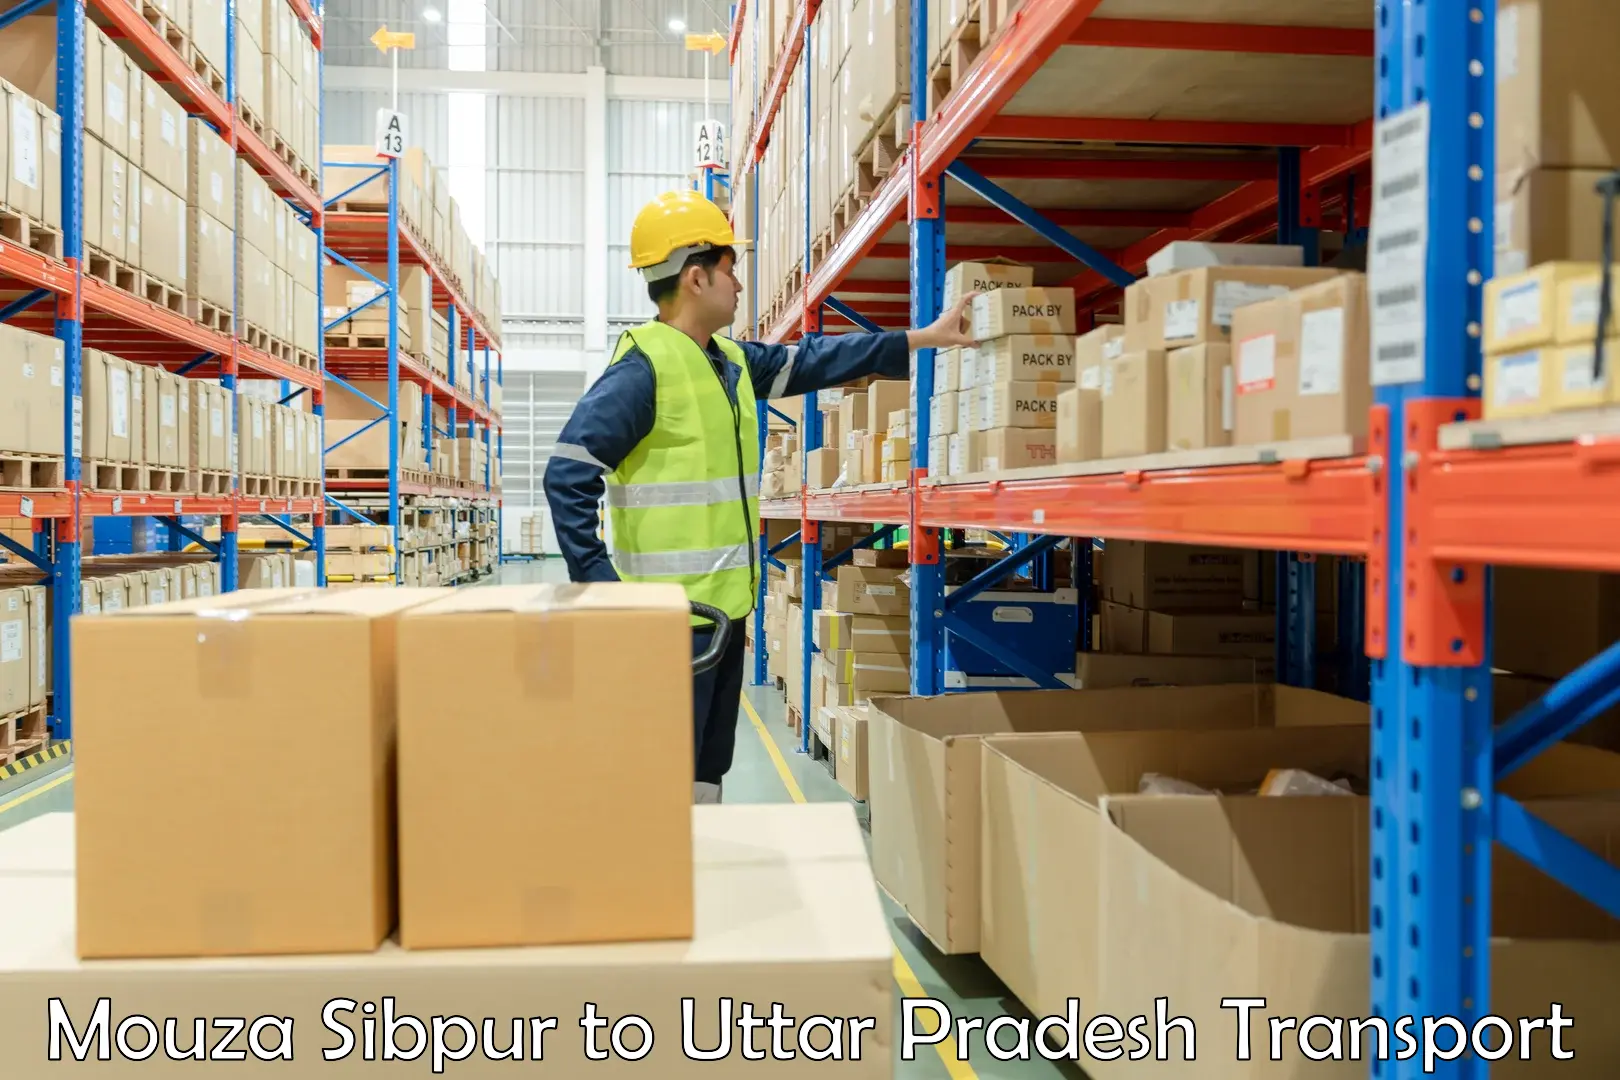 Air freight transport services Mouza Sibpur to Sitapur